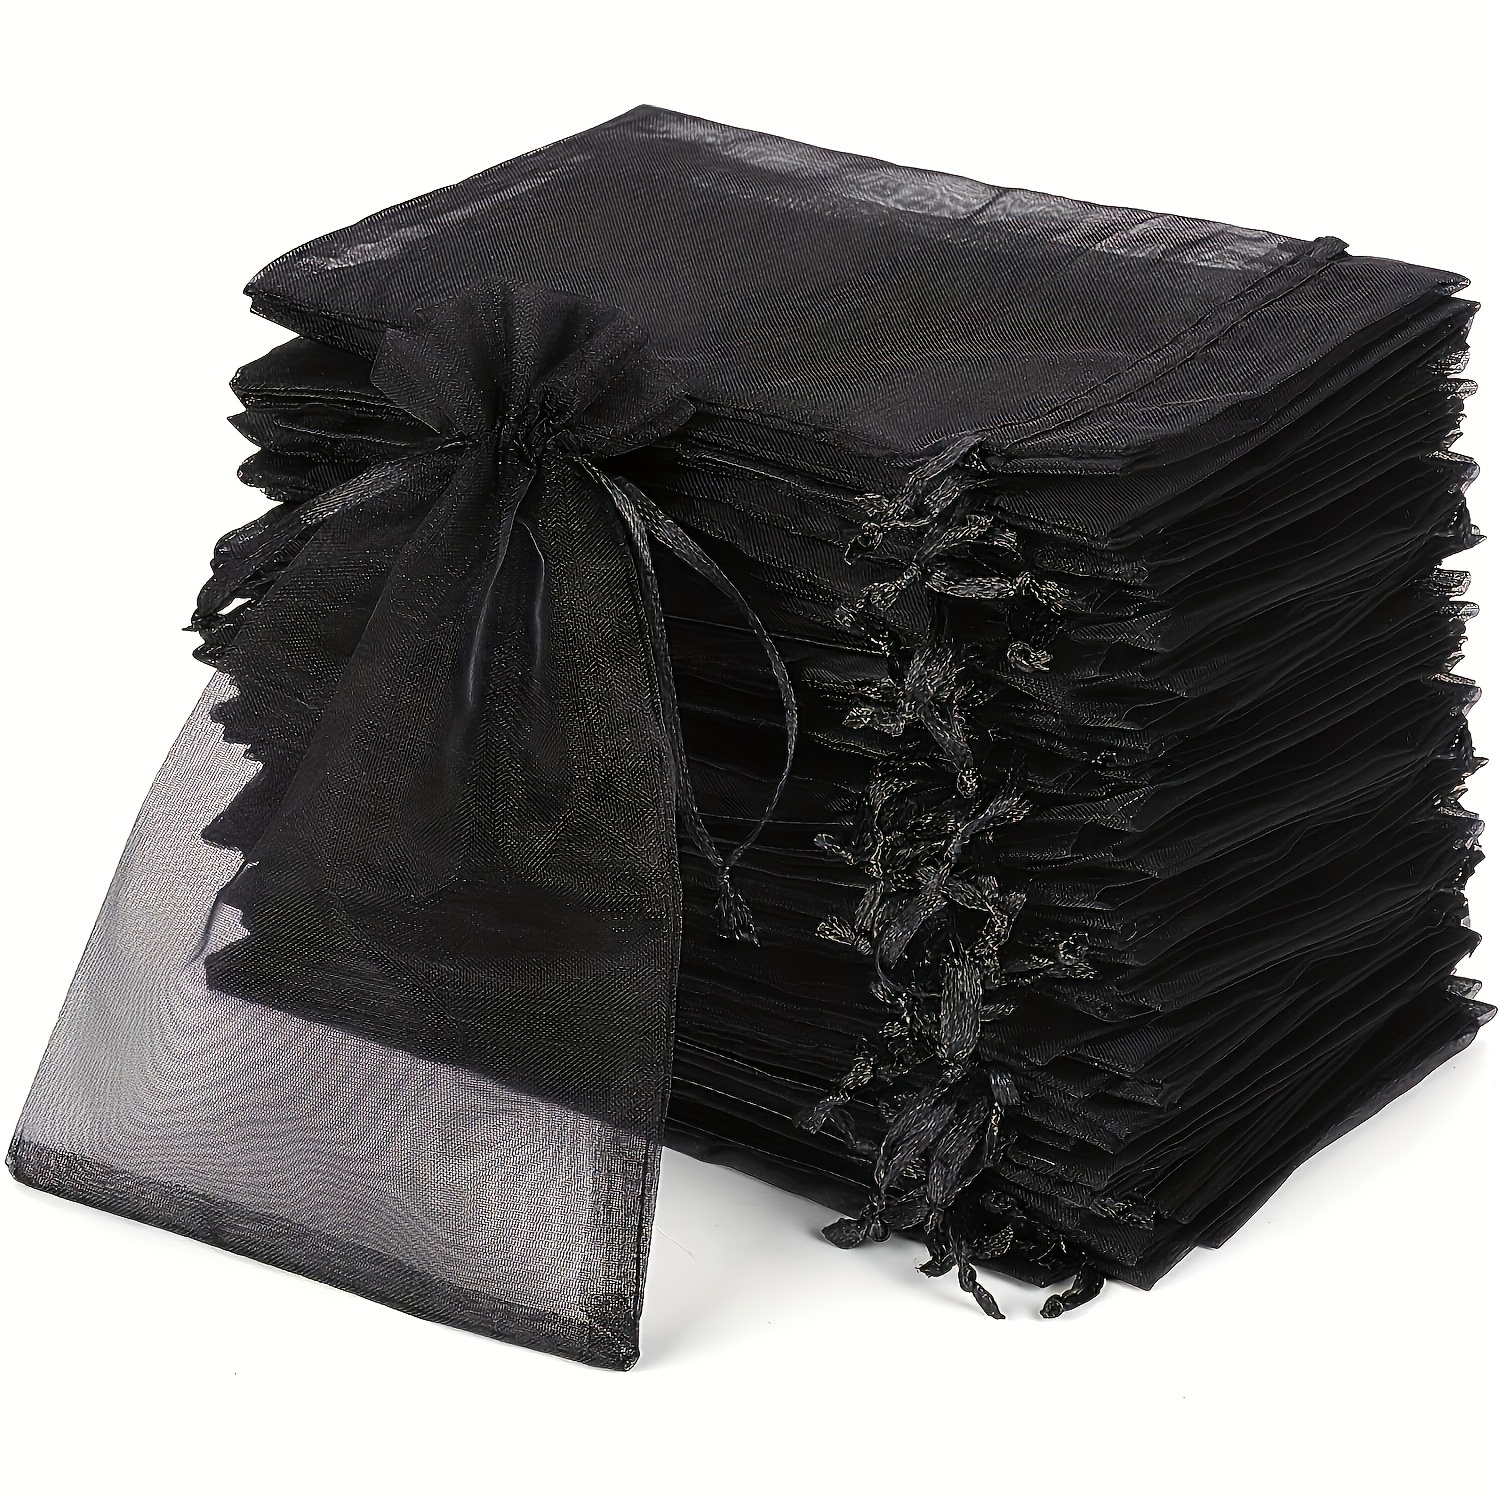 

100pcs Black Organza Bags With Drawstring Perfect For Jewelry, Wedding Favors, And Christmas Gifts, Parties, Holidays, Bathroom Soap, Cosmetic, Seed